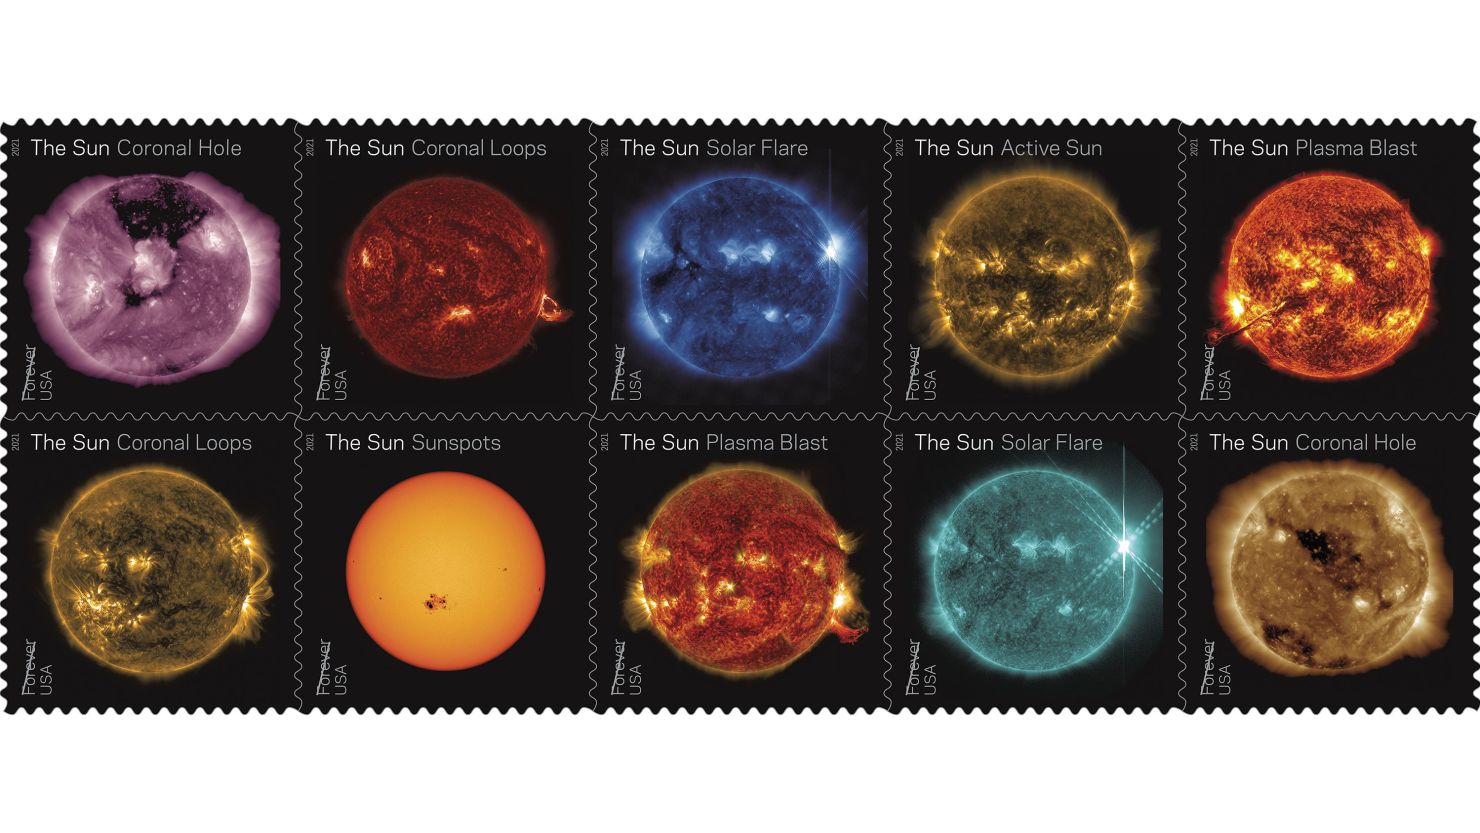 US Postal Service unveils new Earth Day stamp celebrating NOAA Climate  Science